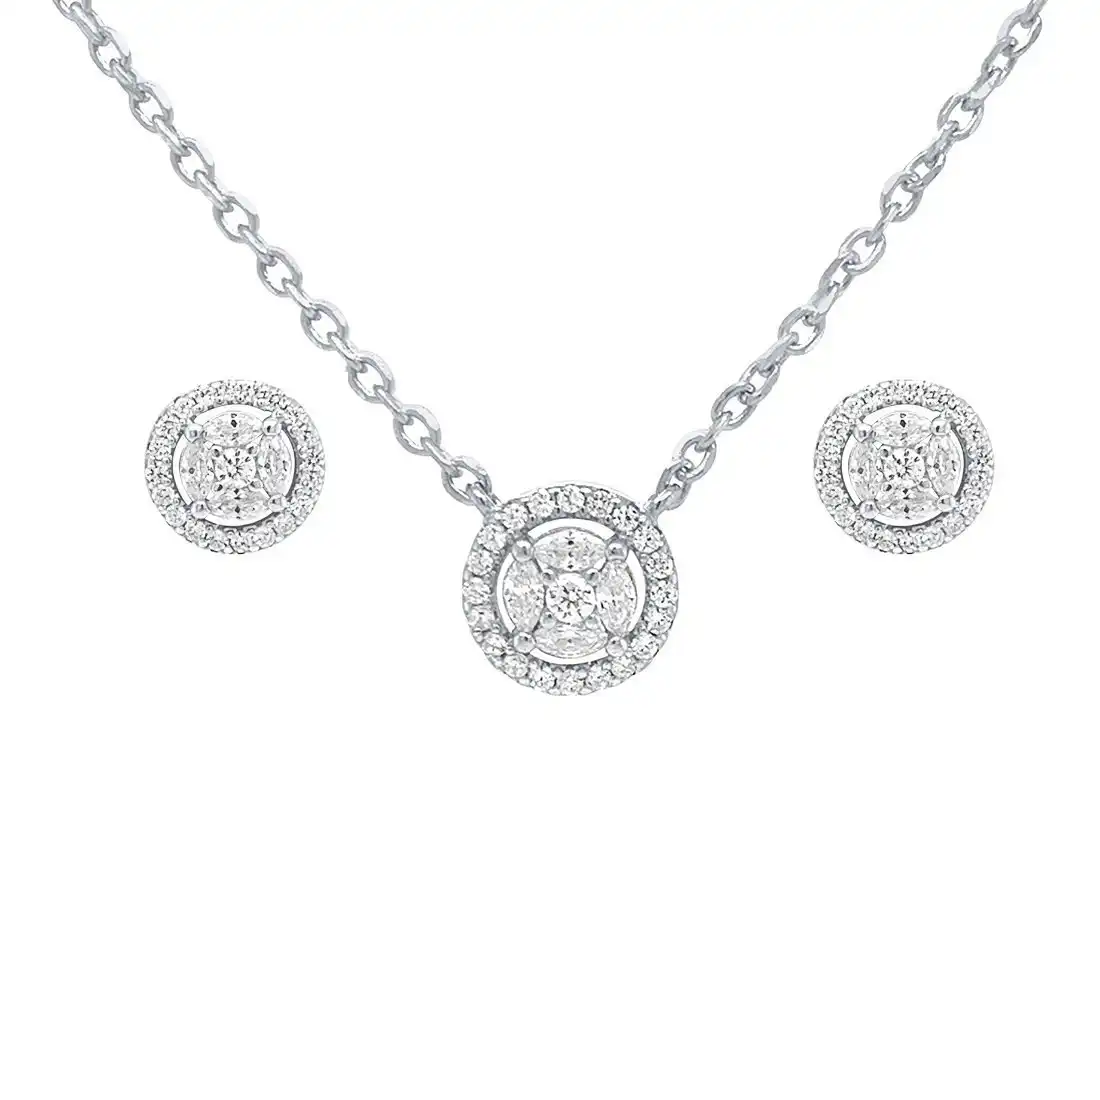 Halo Cubic Zirconia Earring and Necklace Set in Sterling Silver